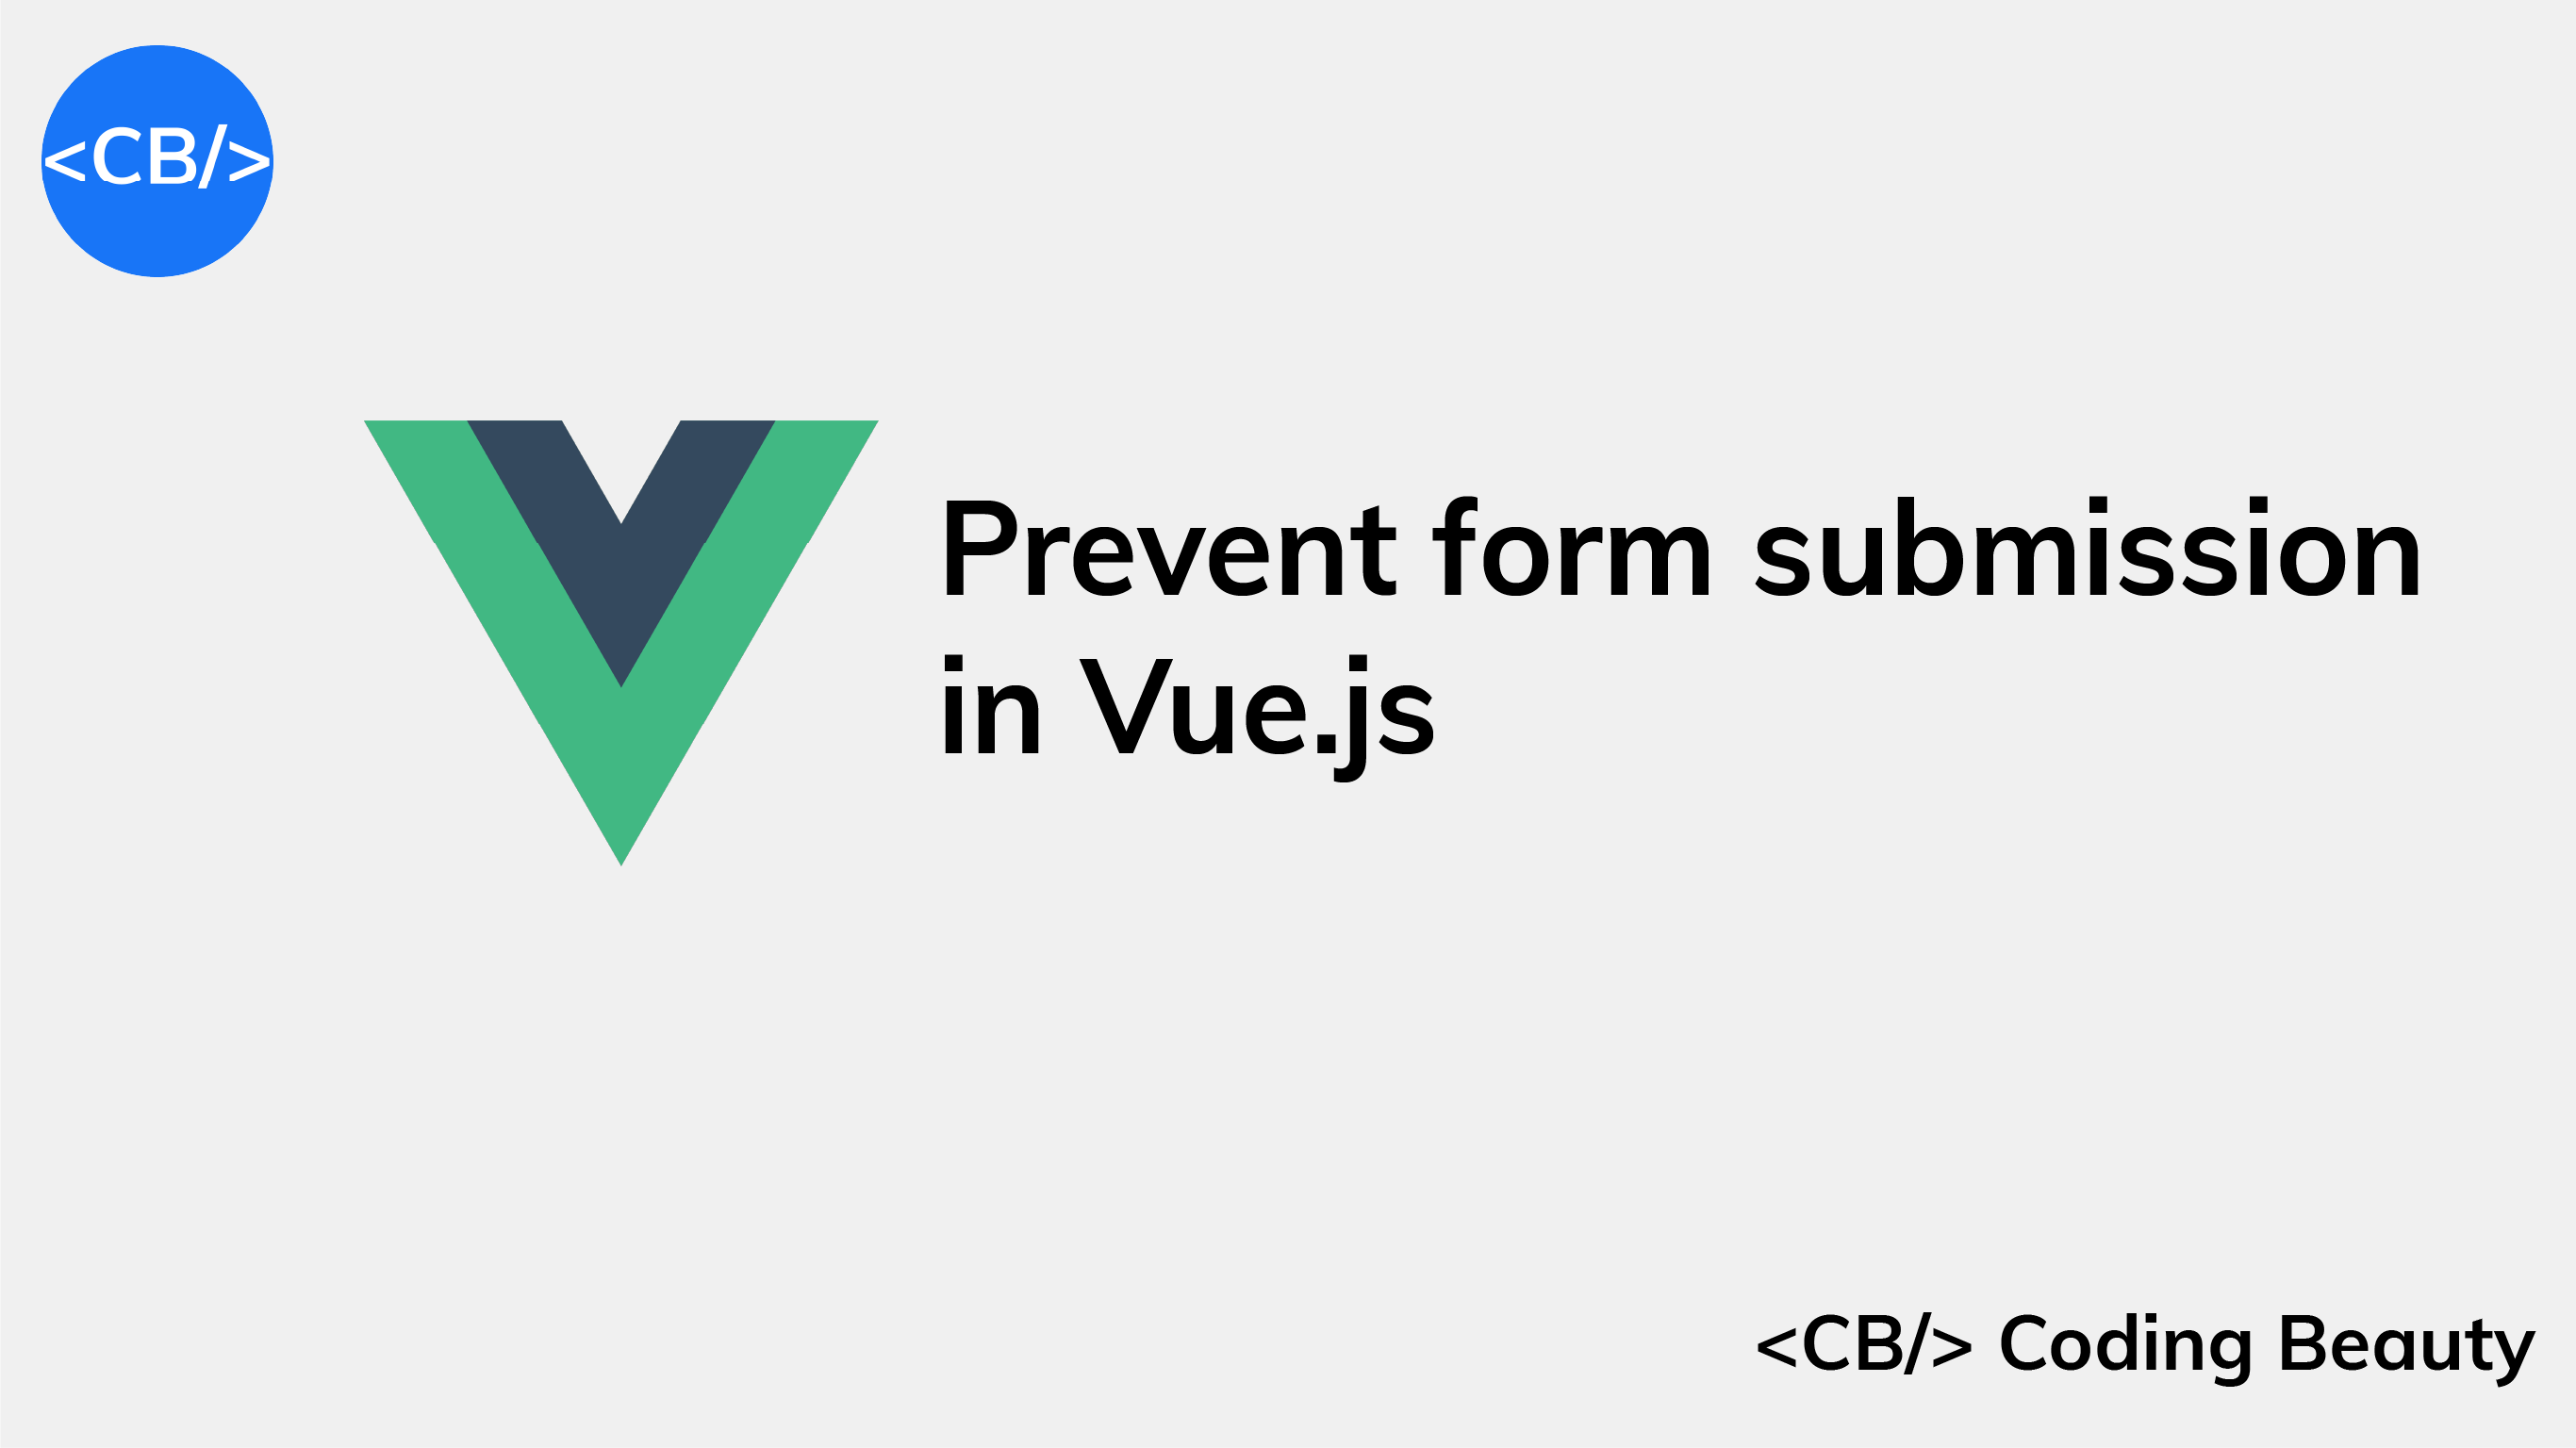 How to prevent form submission in Vue.js